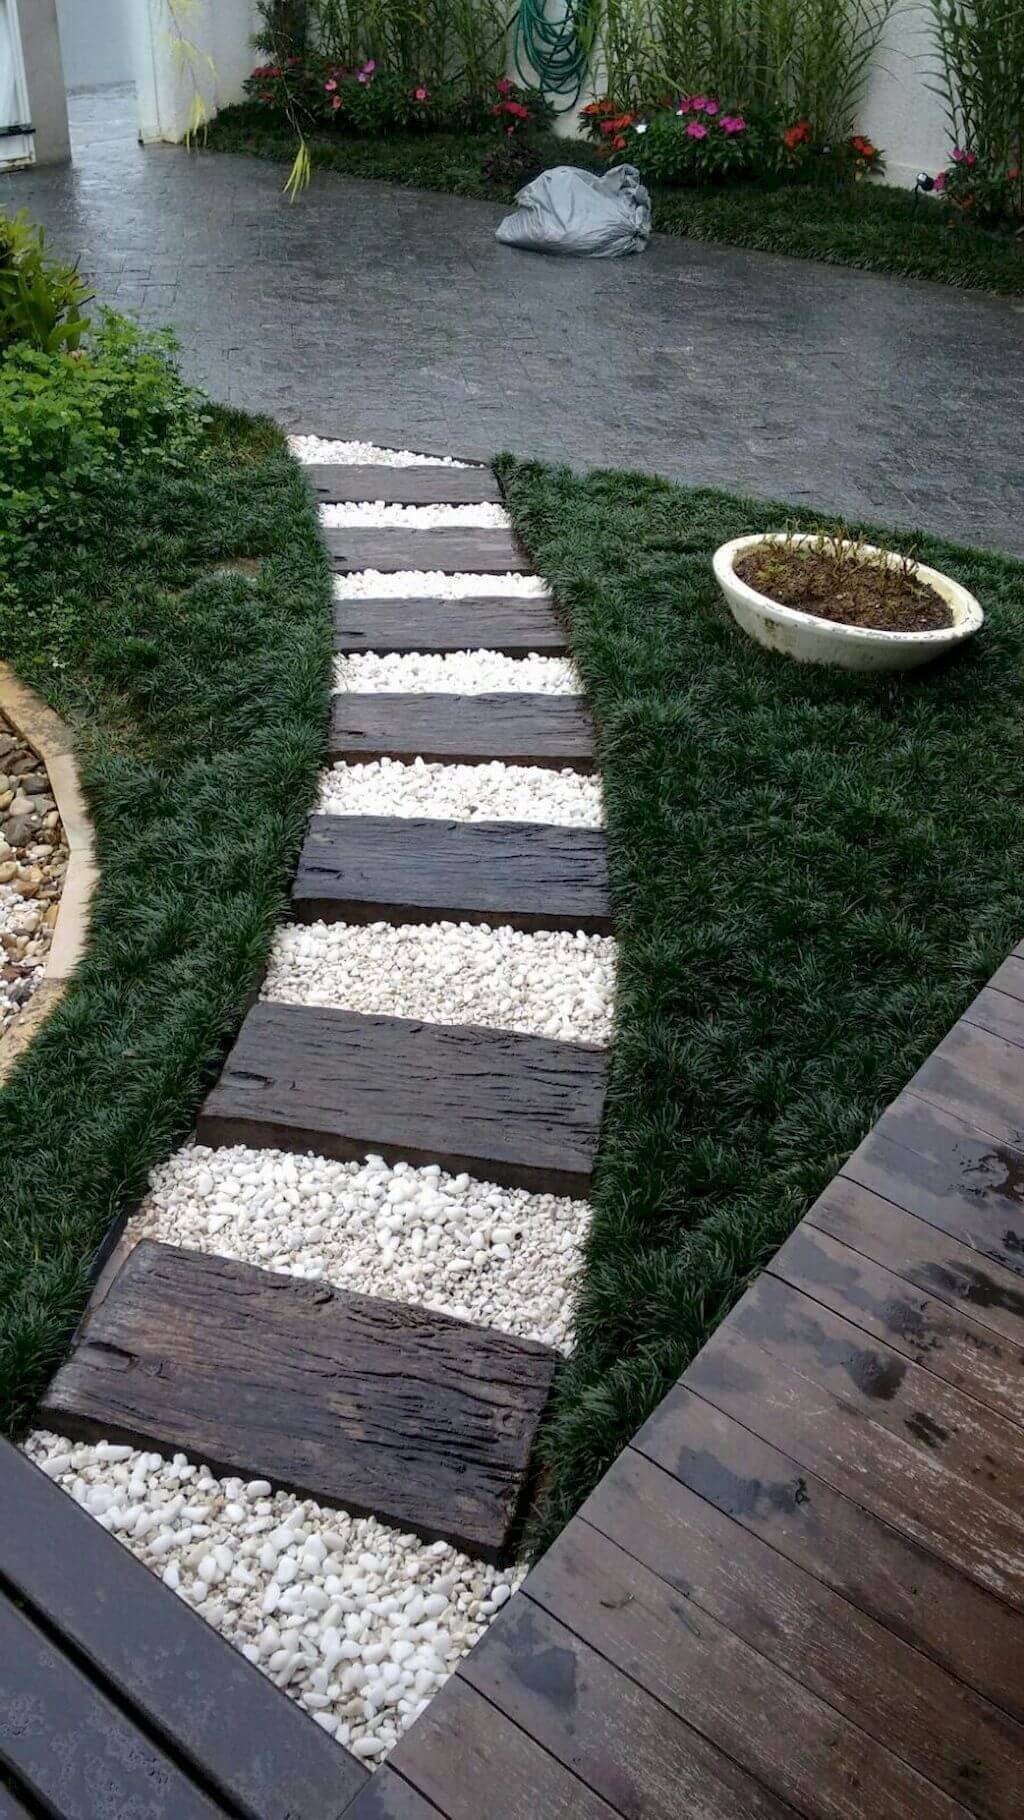 Decorative Stepping Stone Designs For Gardens, Backyards, And Patios!